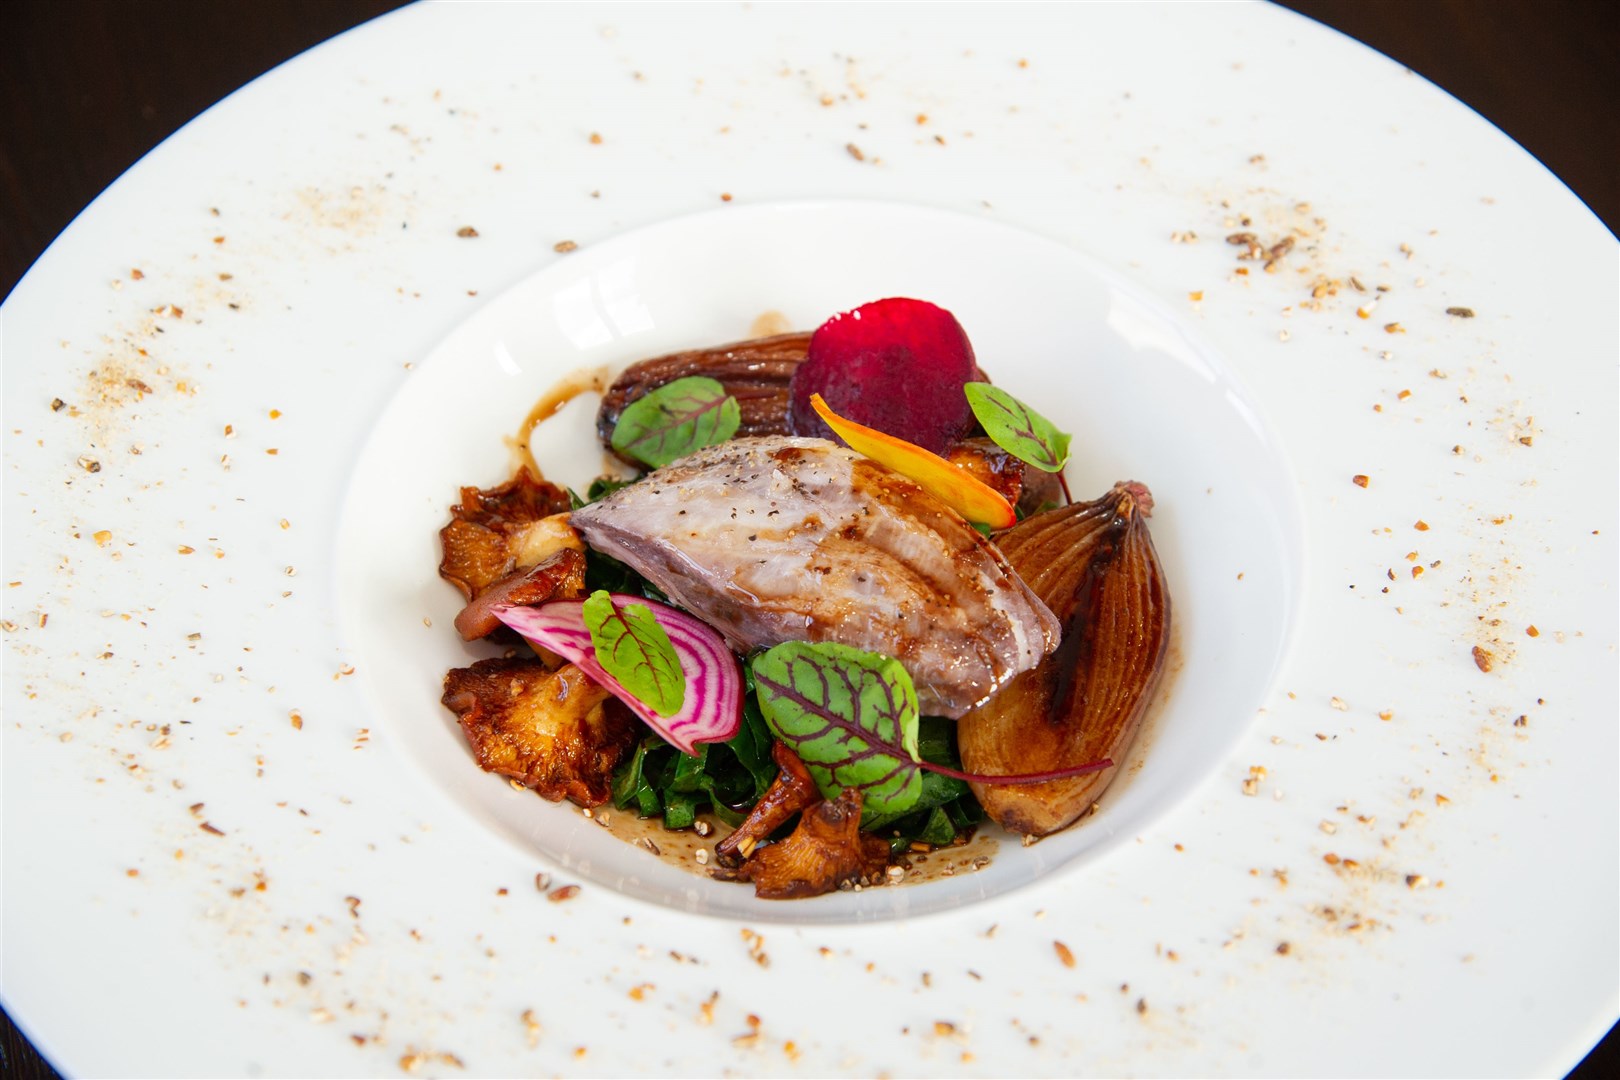 Halibut with early chanterelle mushrooms, shallot, beetroot, kohlrabi leaf and veal jus. Picture: Daniel Forsyth.